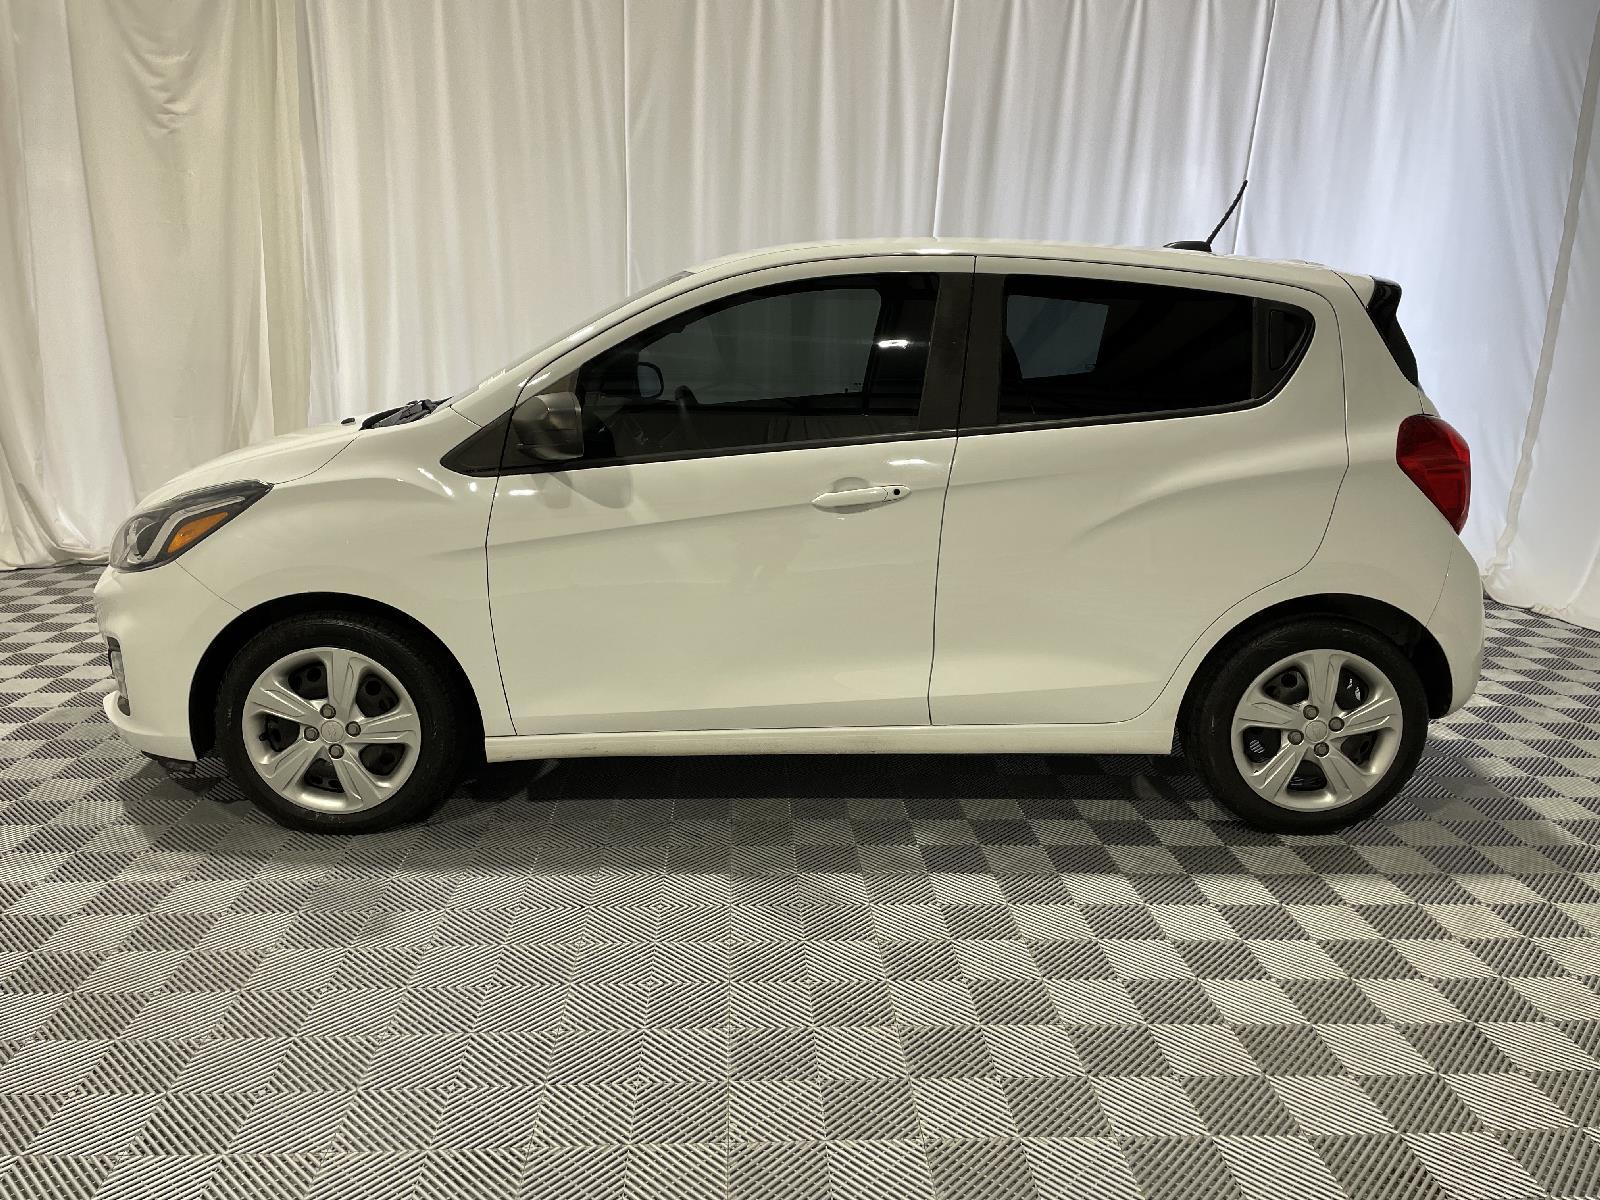 Used 2019 Chevrolet Spark LS Hatchback for sale in St Joseph MO